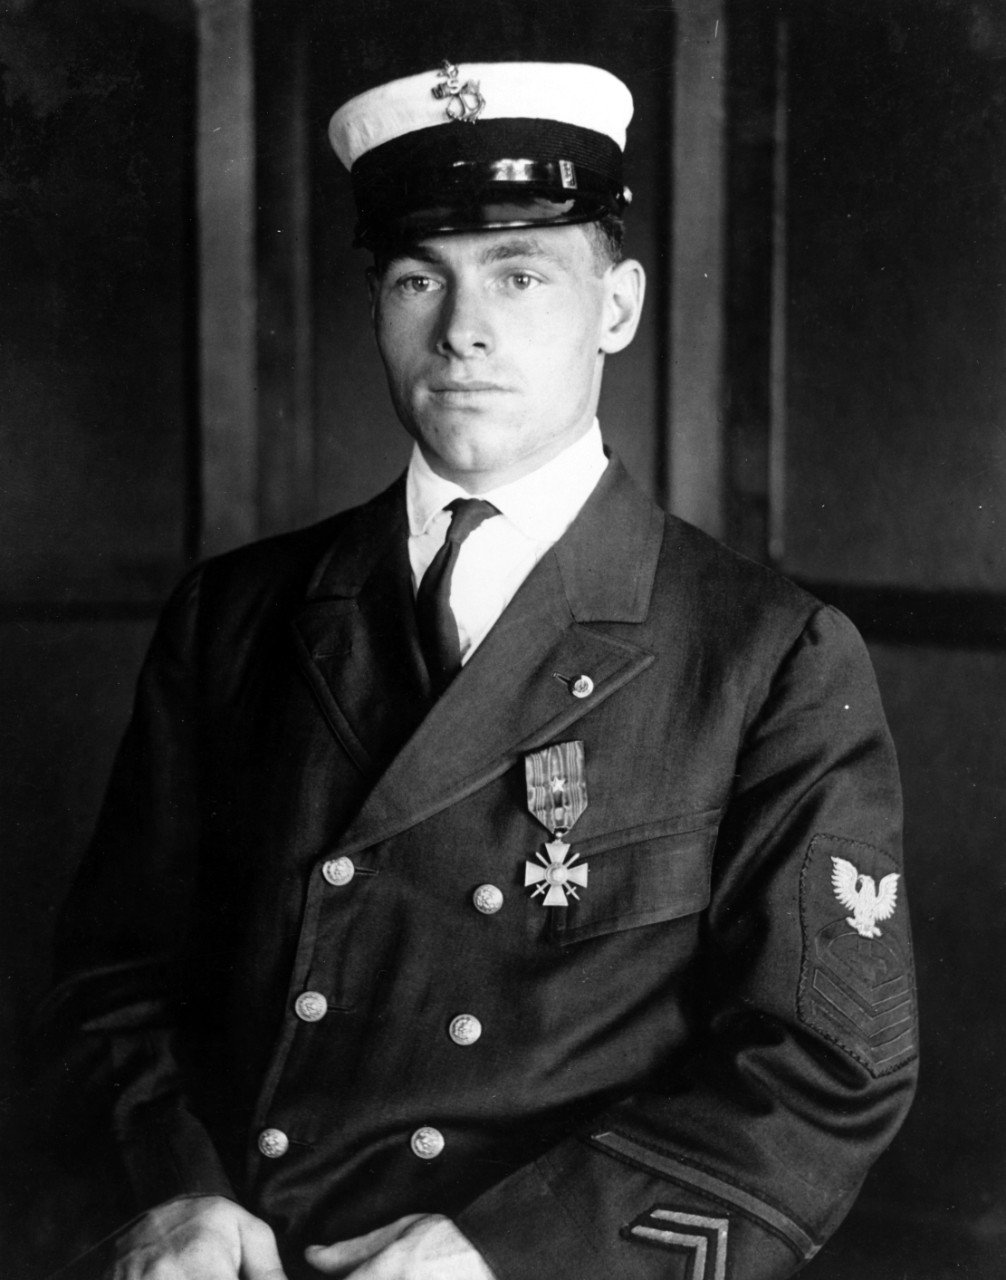 Percy Templeton, Chief Pharmacists Mate, USN.